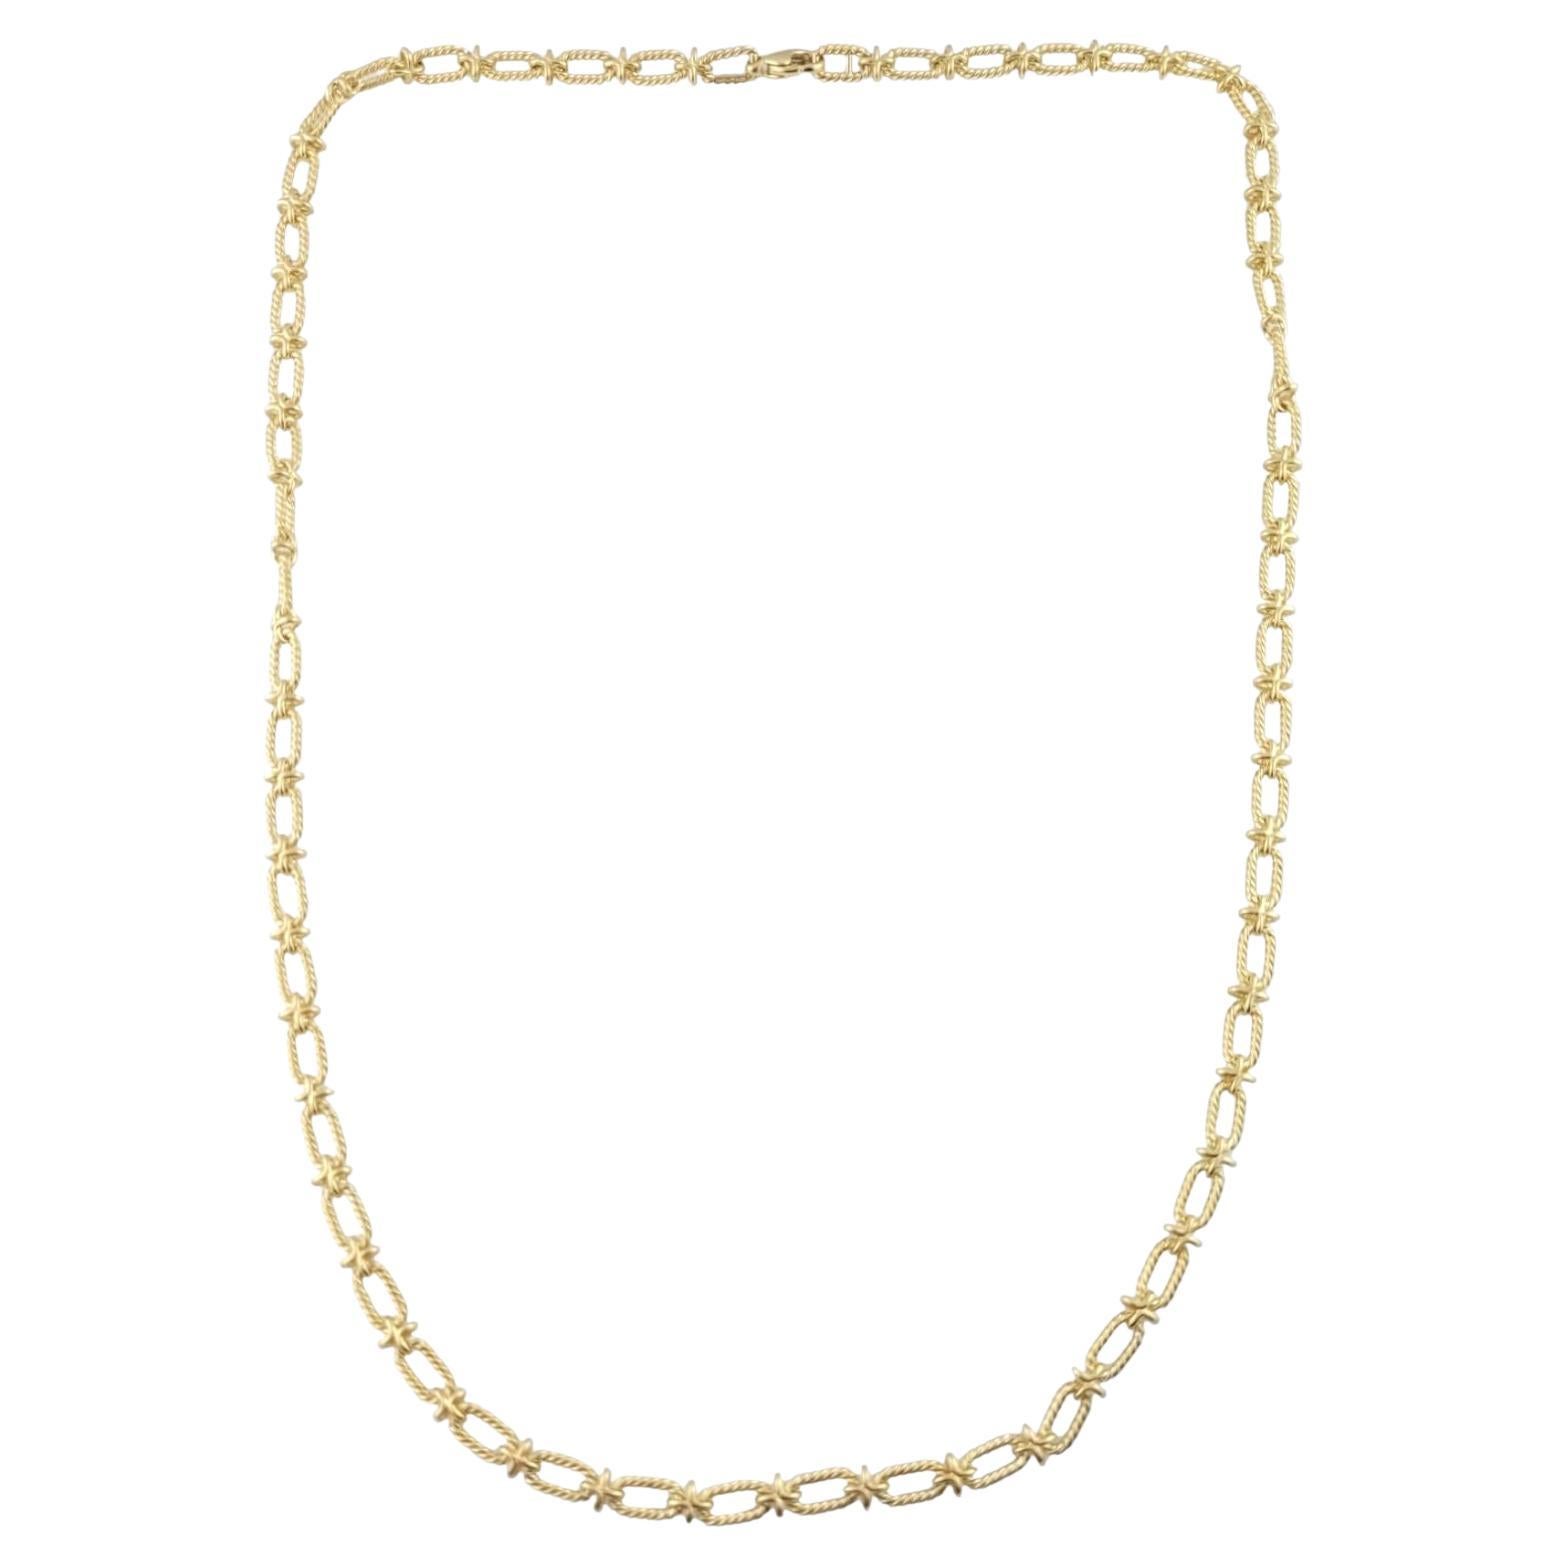 Tiffany & Co. 14K Yellow Gold Oval Link Ribbed Chain #15830